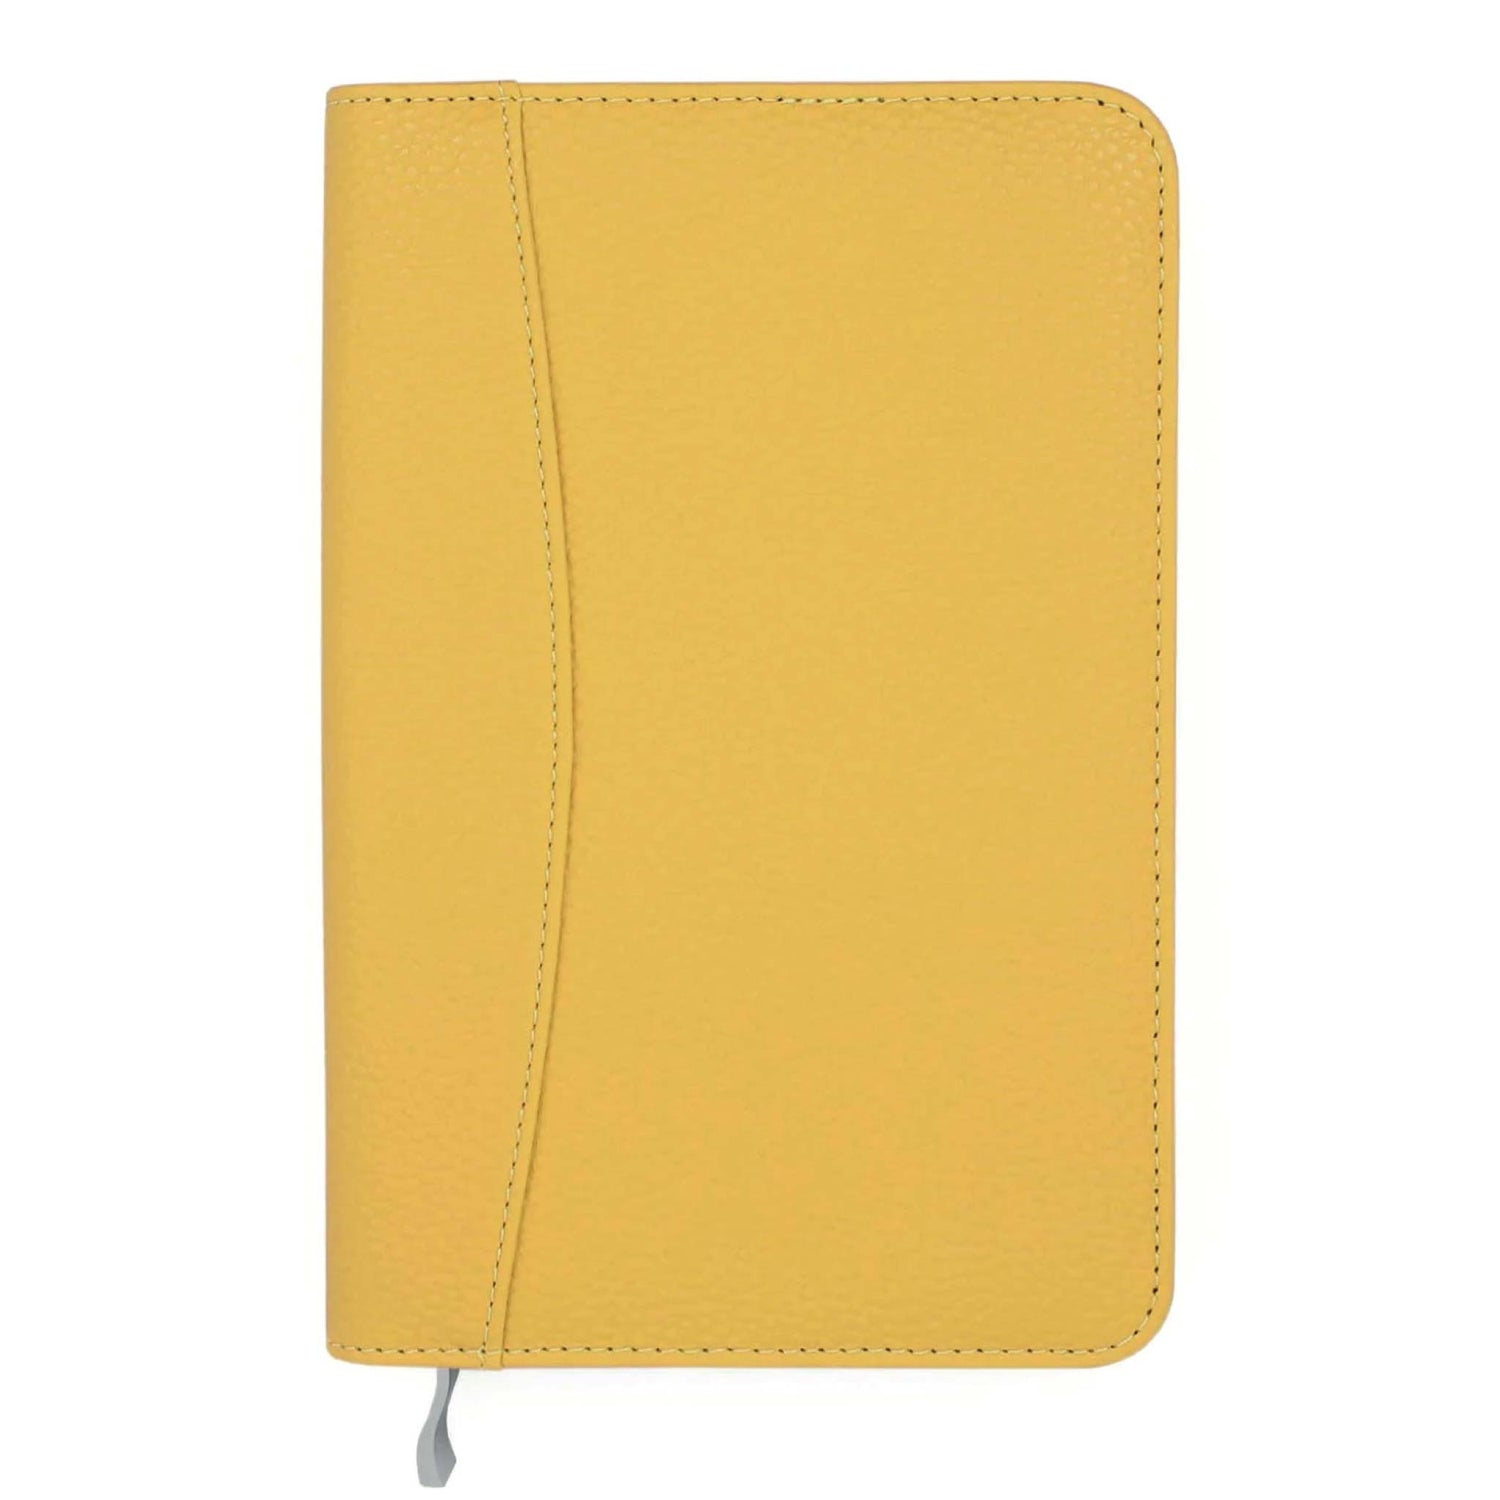 Pocket Life Book Diary Cover